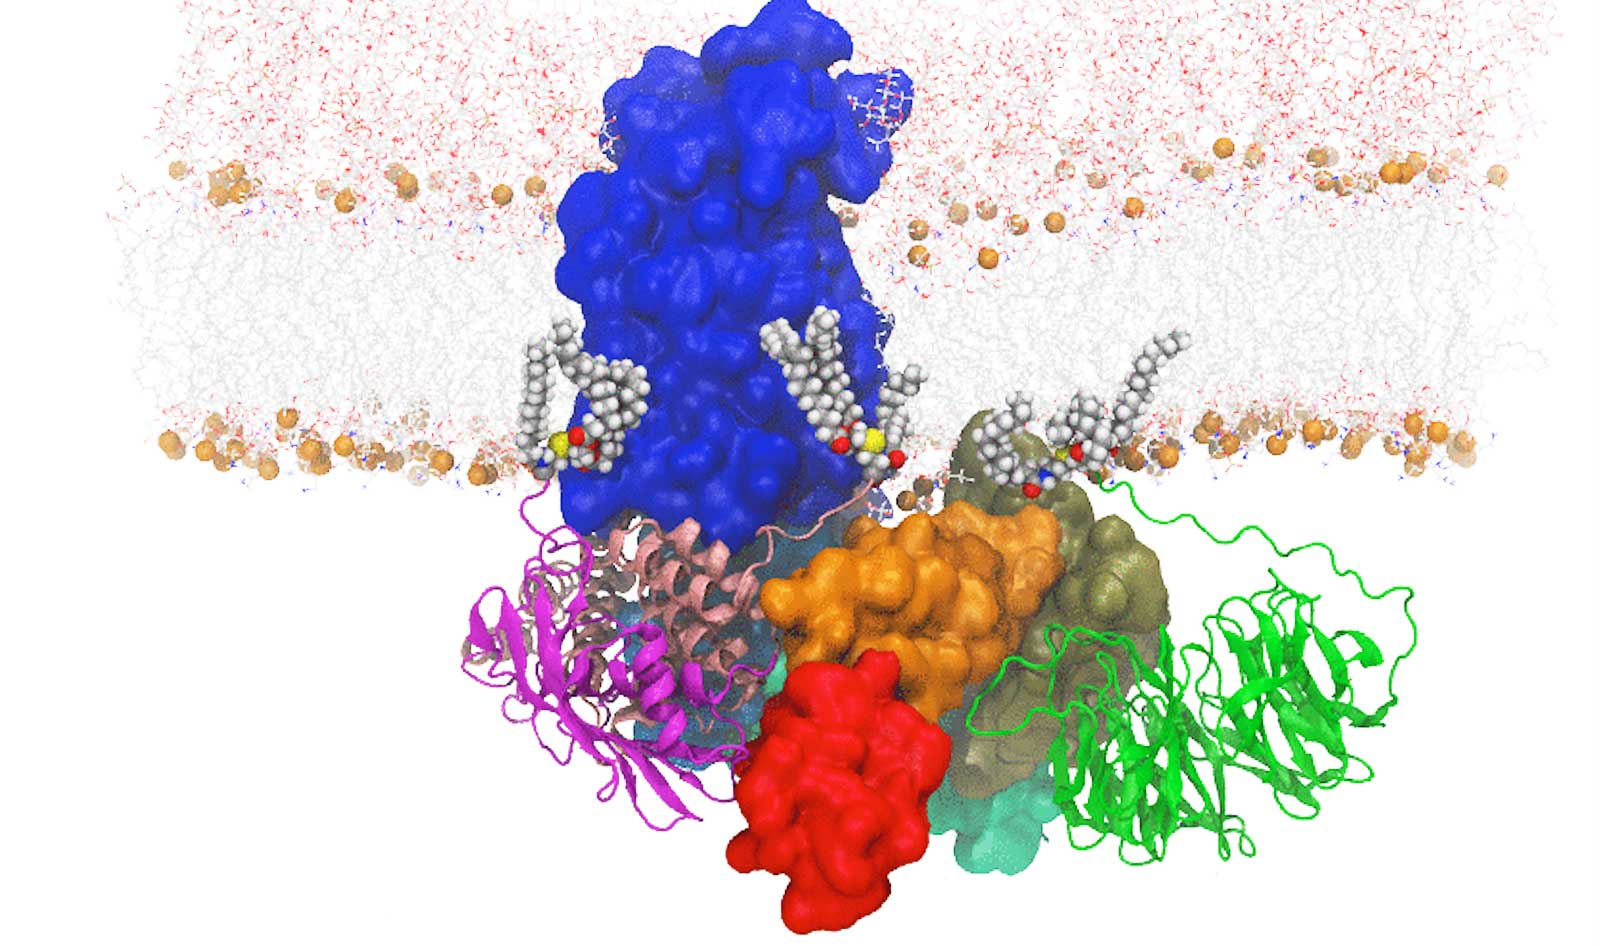 A molecular dynamics simulation system of one of the proteins studied in the professor Karen Fleming's lab.